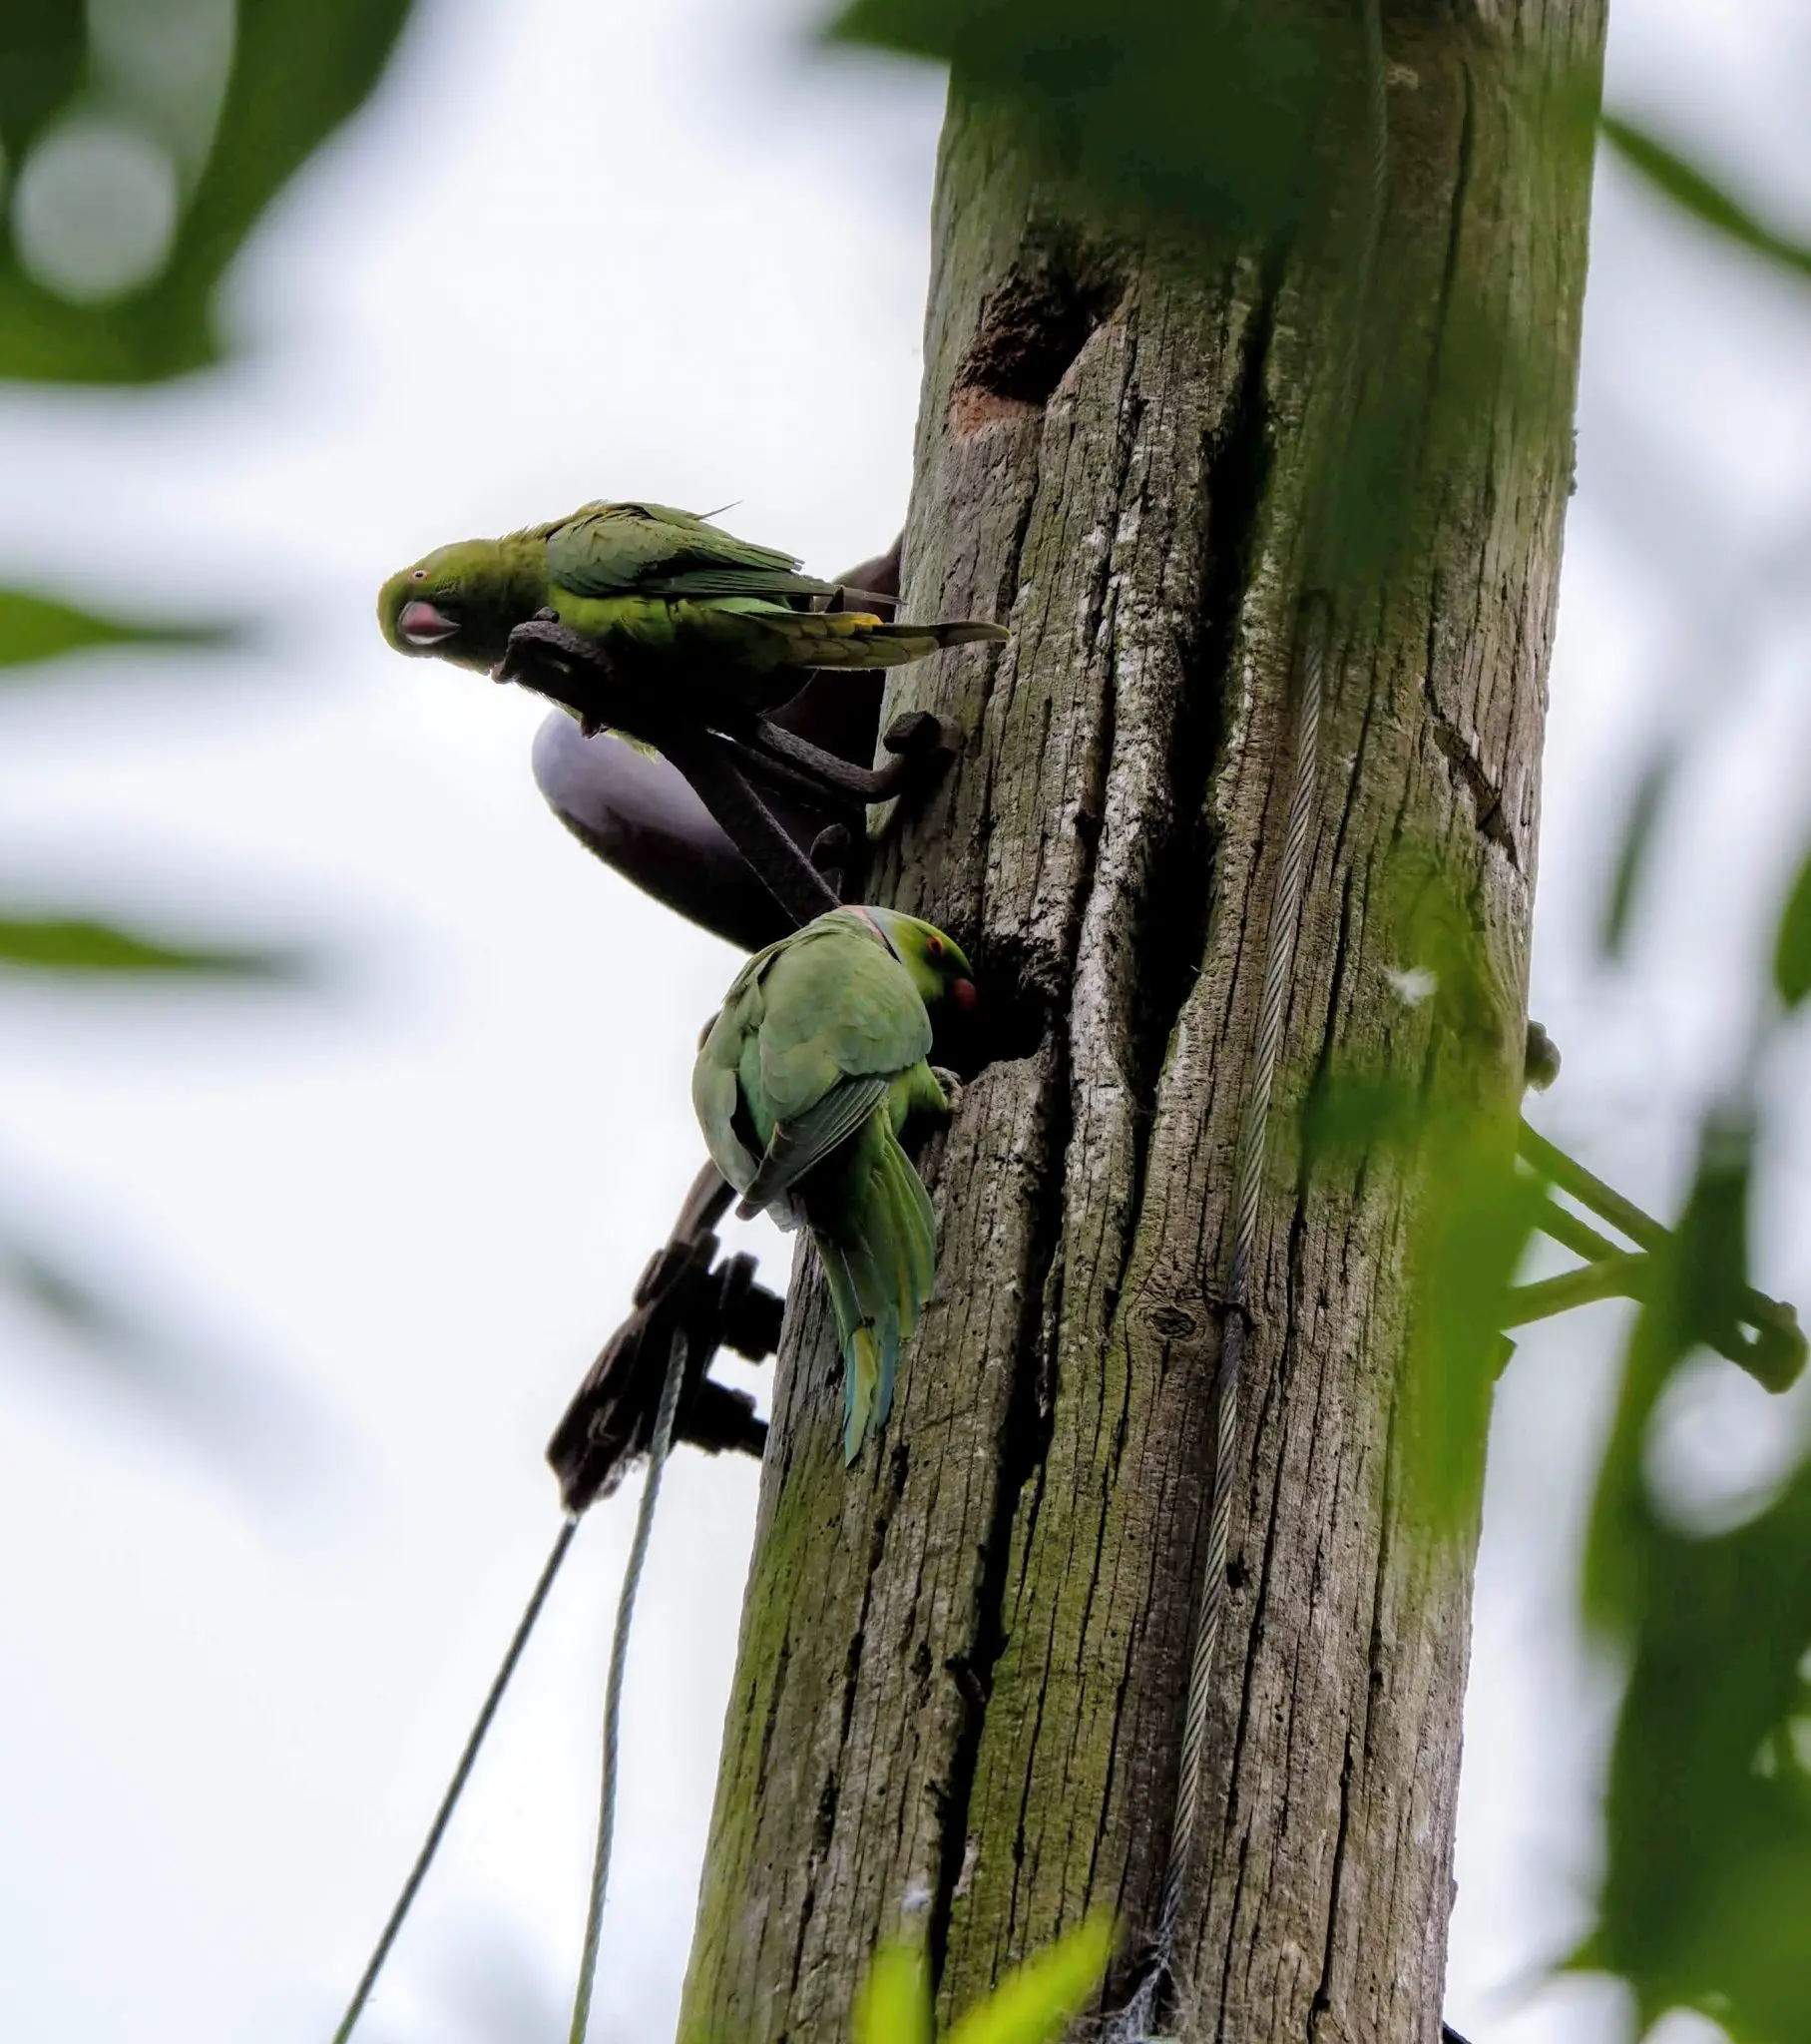 Ring-necked parakeets nesting in a telegraph pole